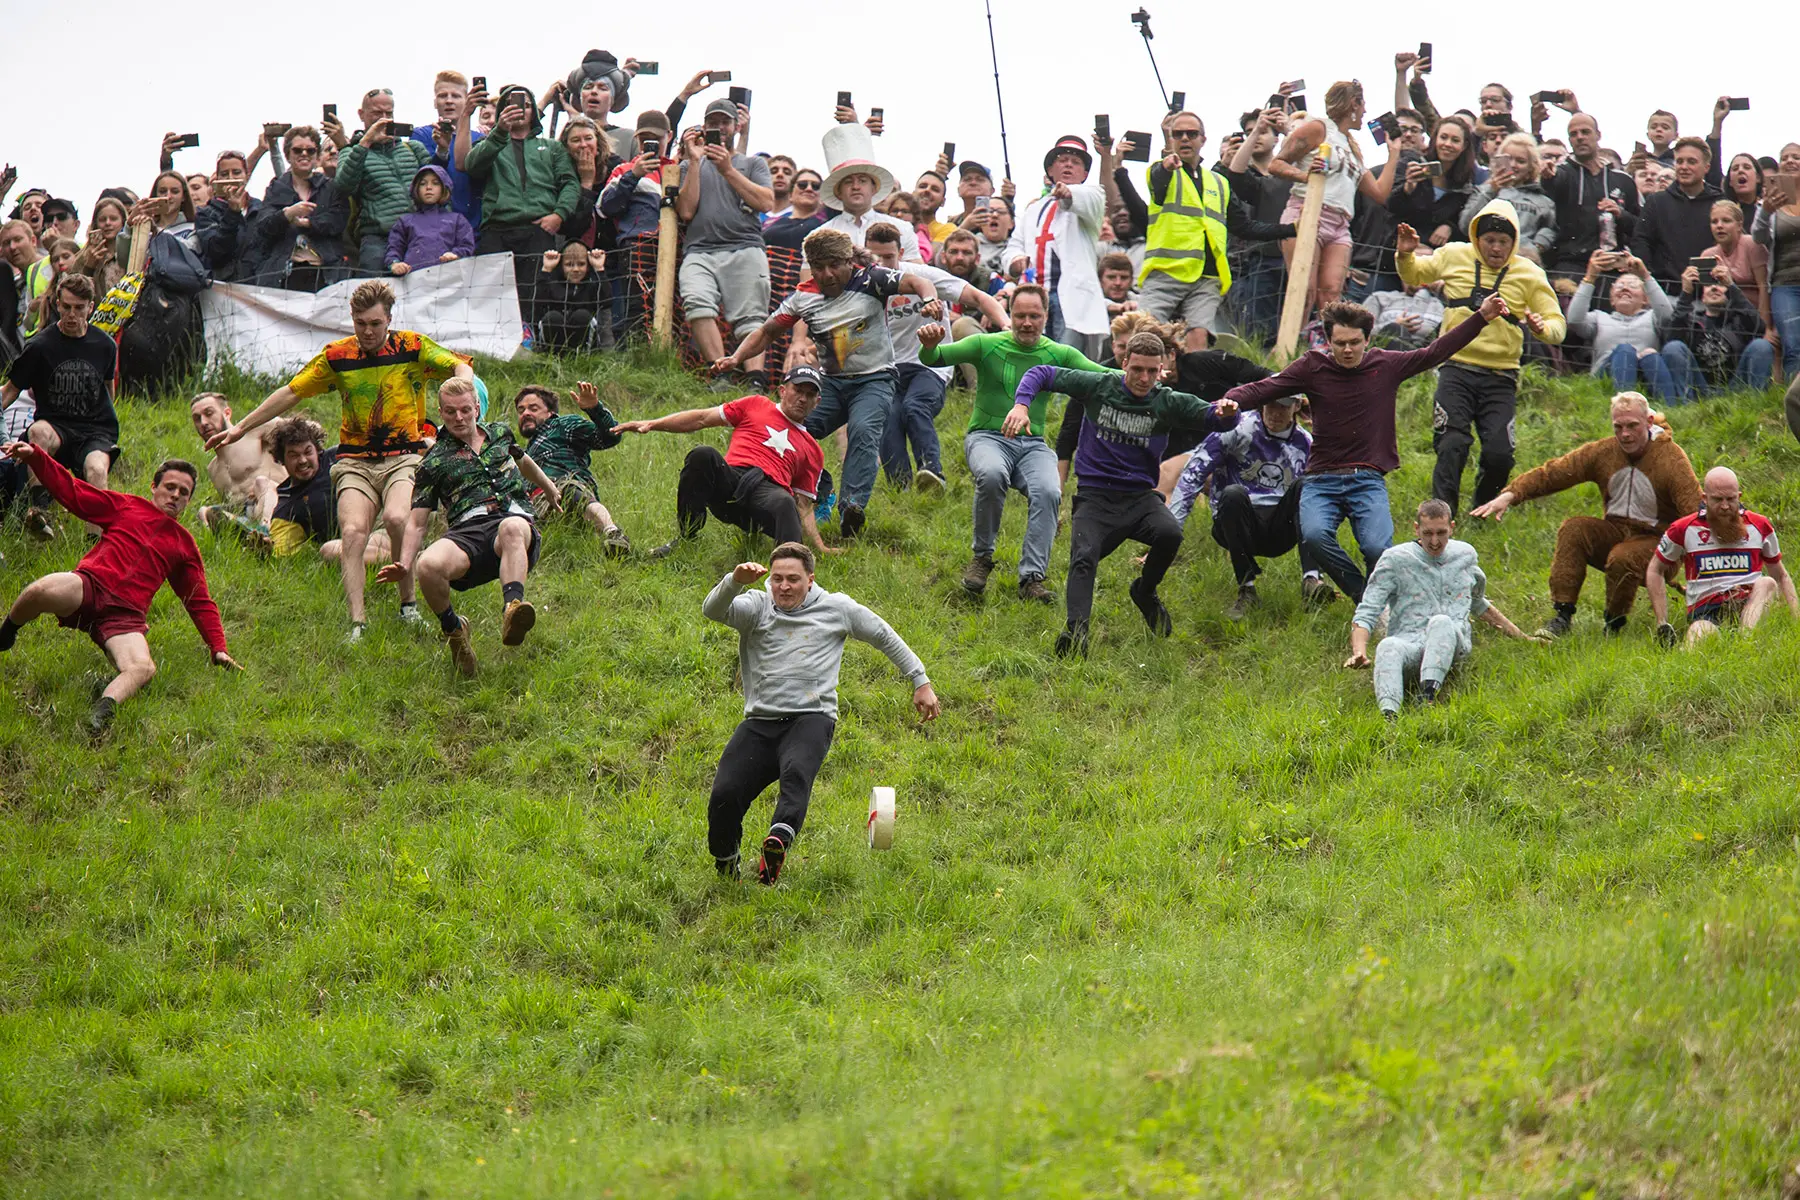 A crowd of men chase a wheel of cheese down a steep hill